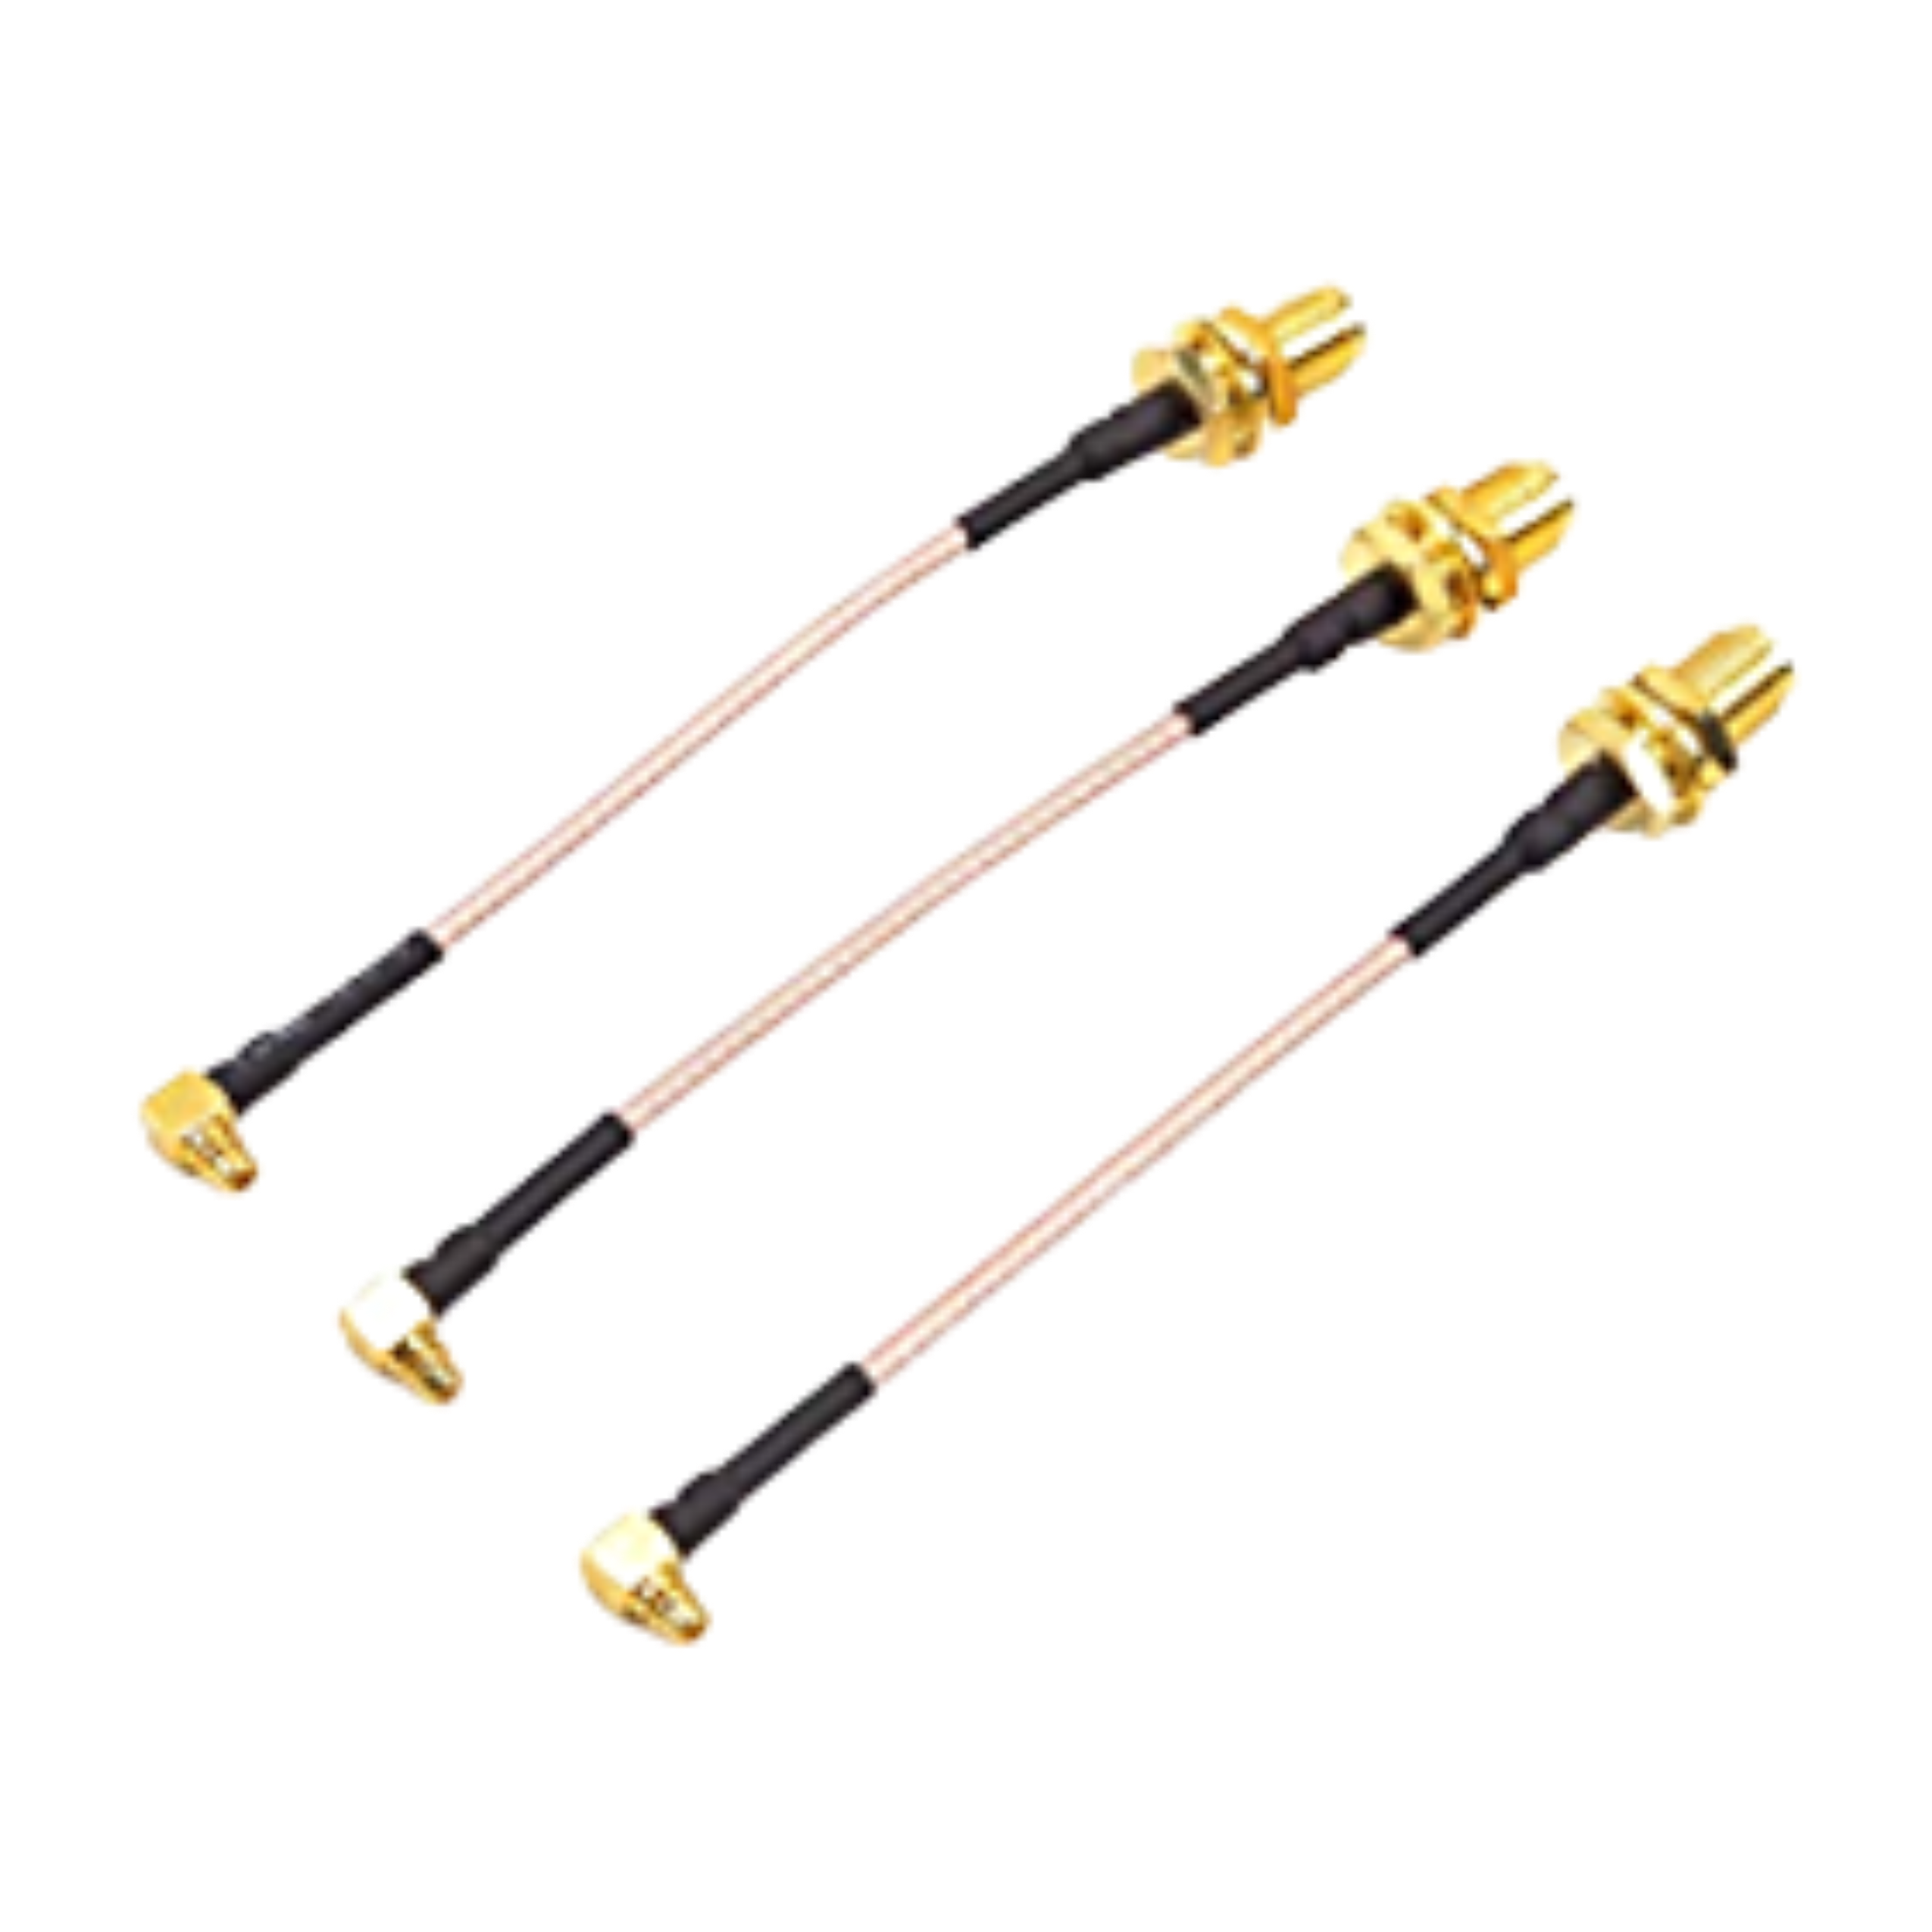 Wolfwhoop Q3-A 3pcs MMCX to SMA Female 80mm Low Loss FPV Antenna Extension Cable Antenna Adapter - DroneDynamics.ca